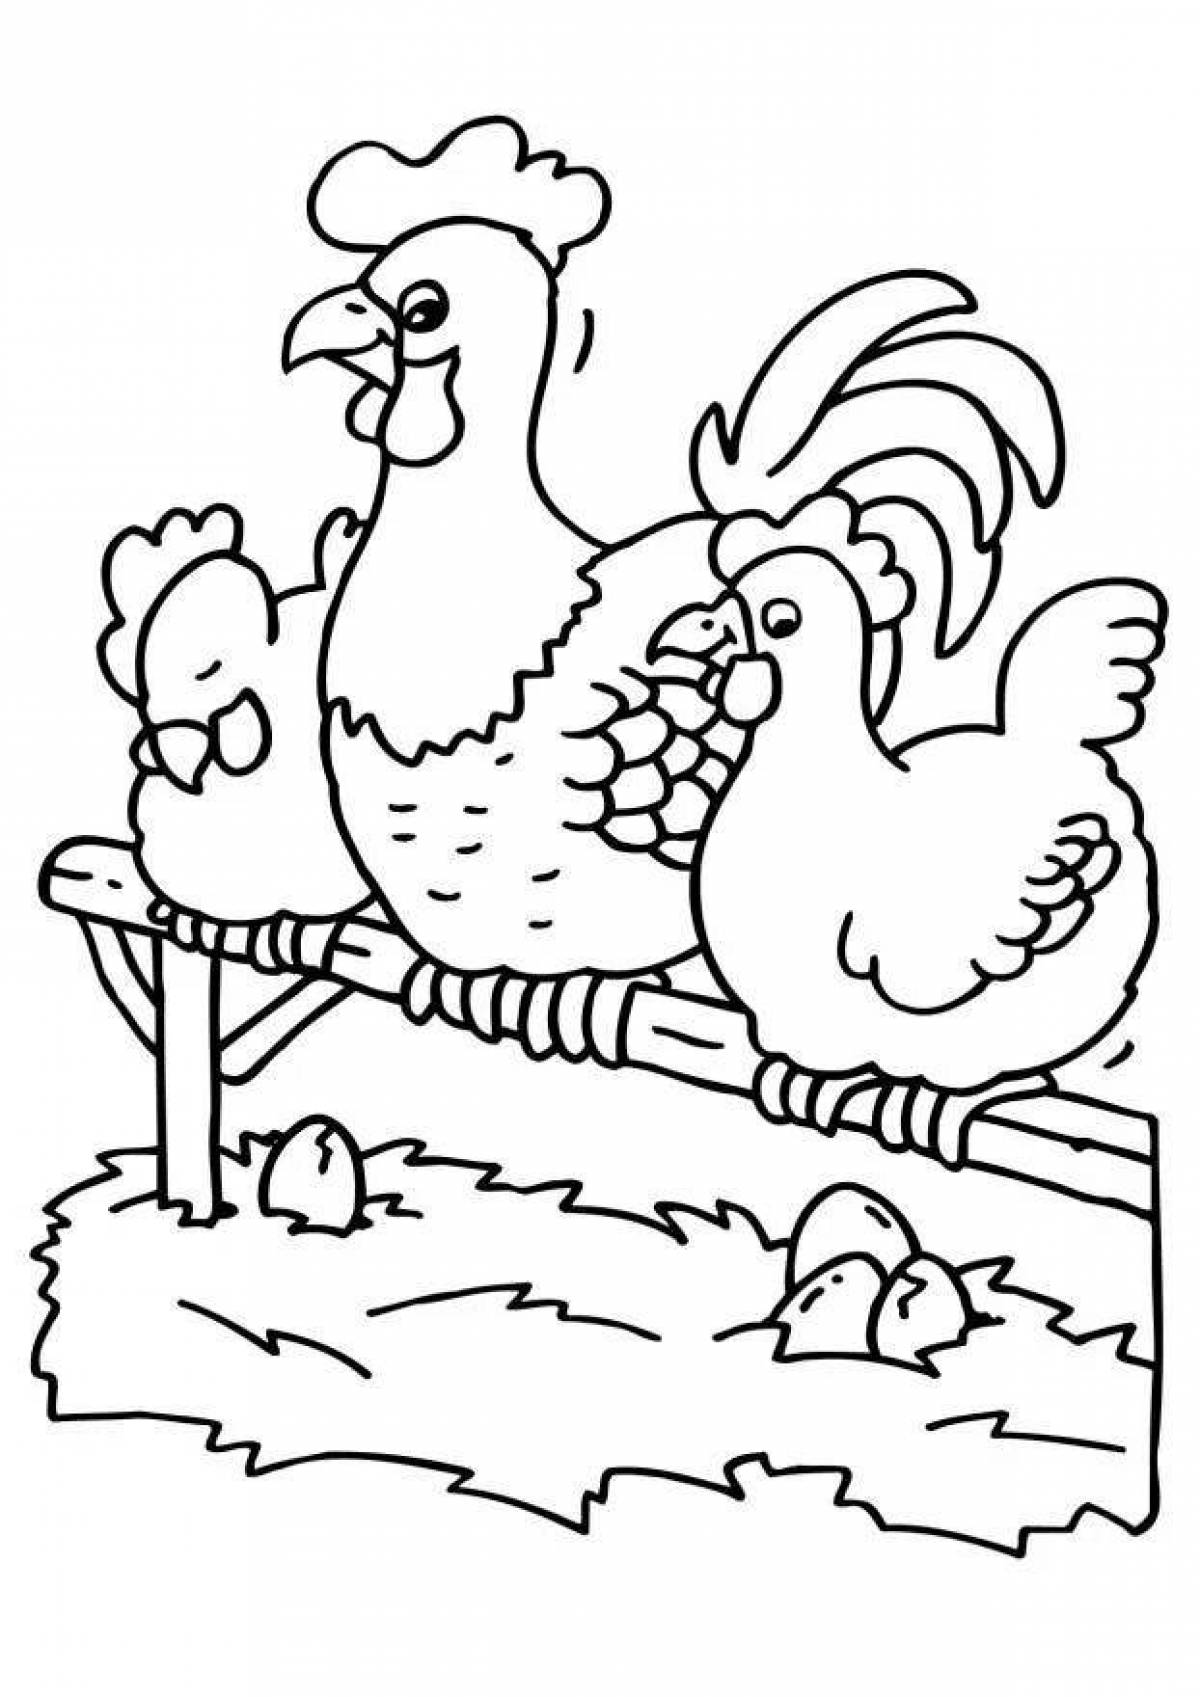 Amusing coloring rooster and hen